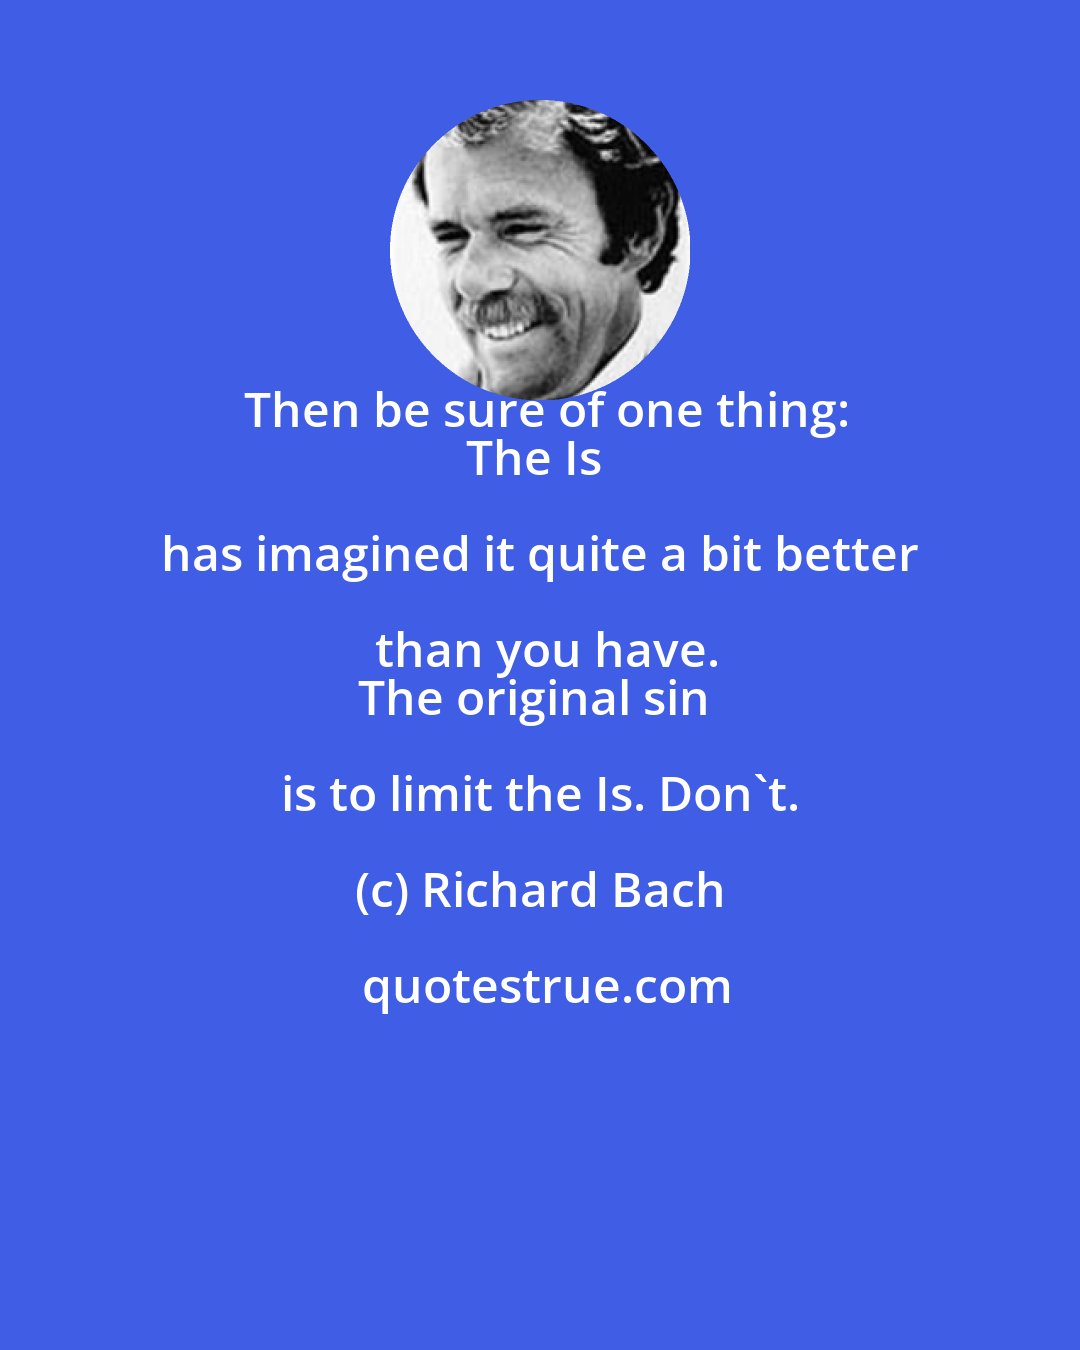 Richard Bach: Then be sure of one thing:
The Is has imagined it quite a bit better than you have.
The original sin is to limit the Is. Don't.